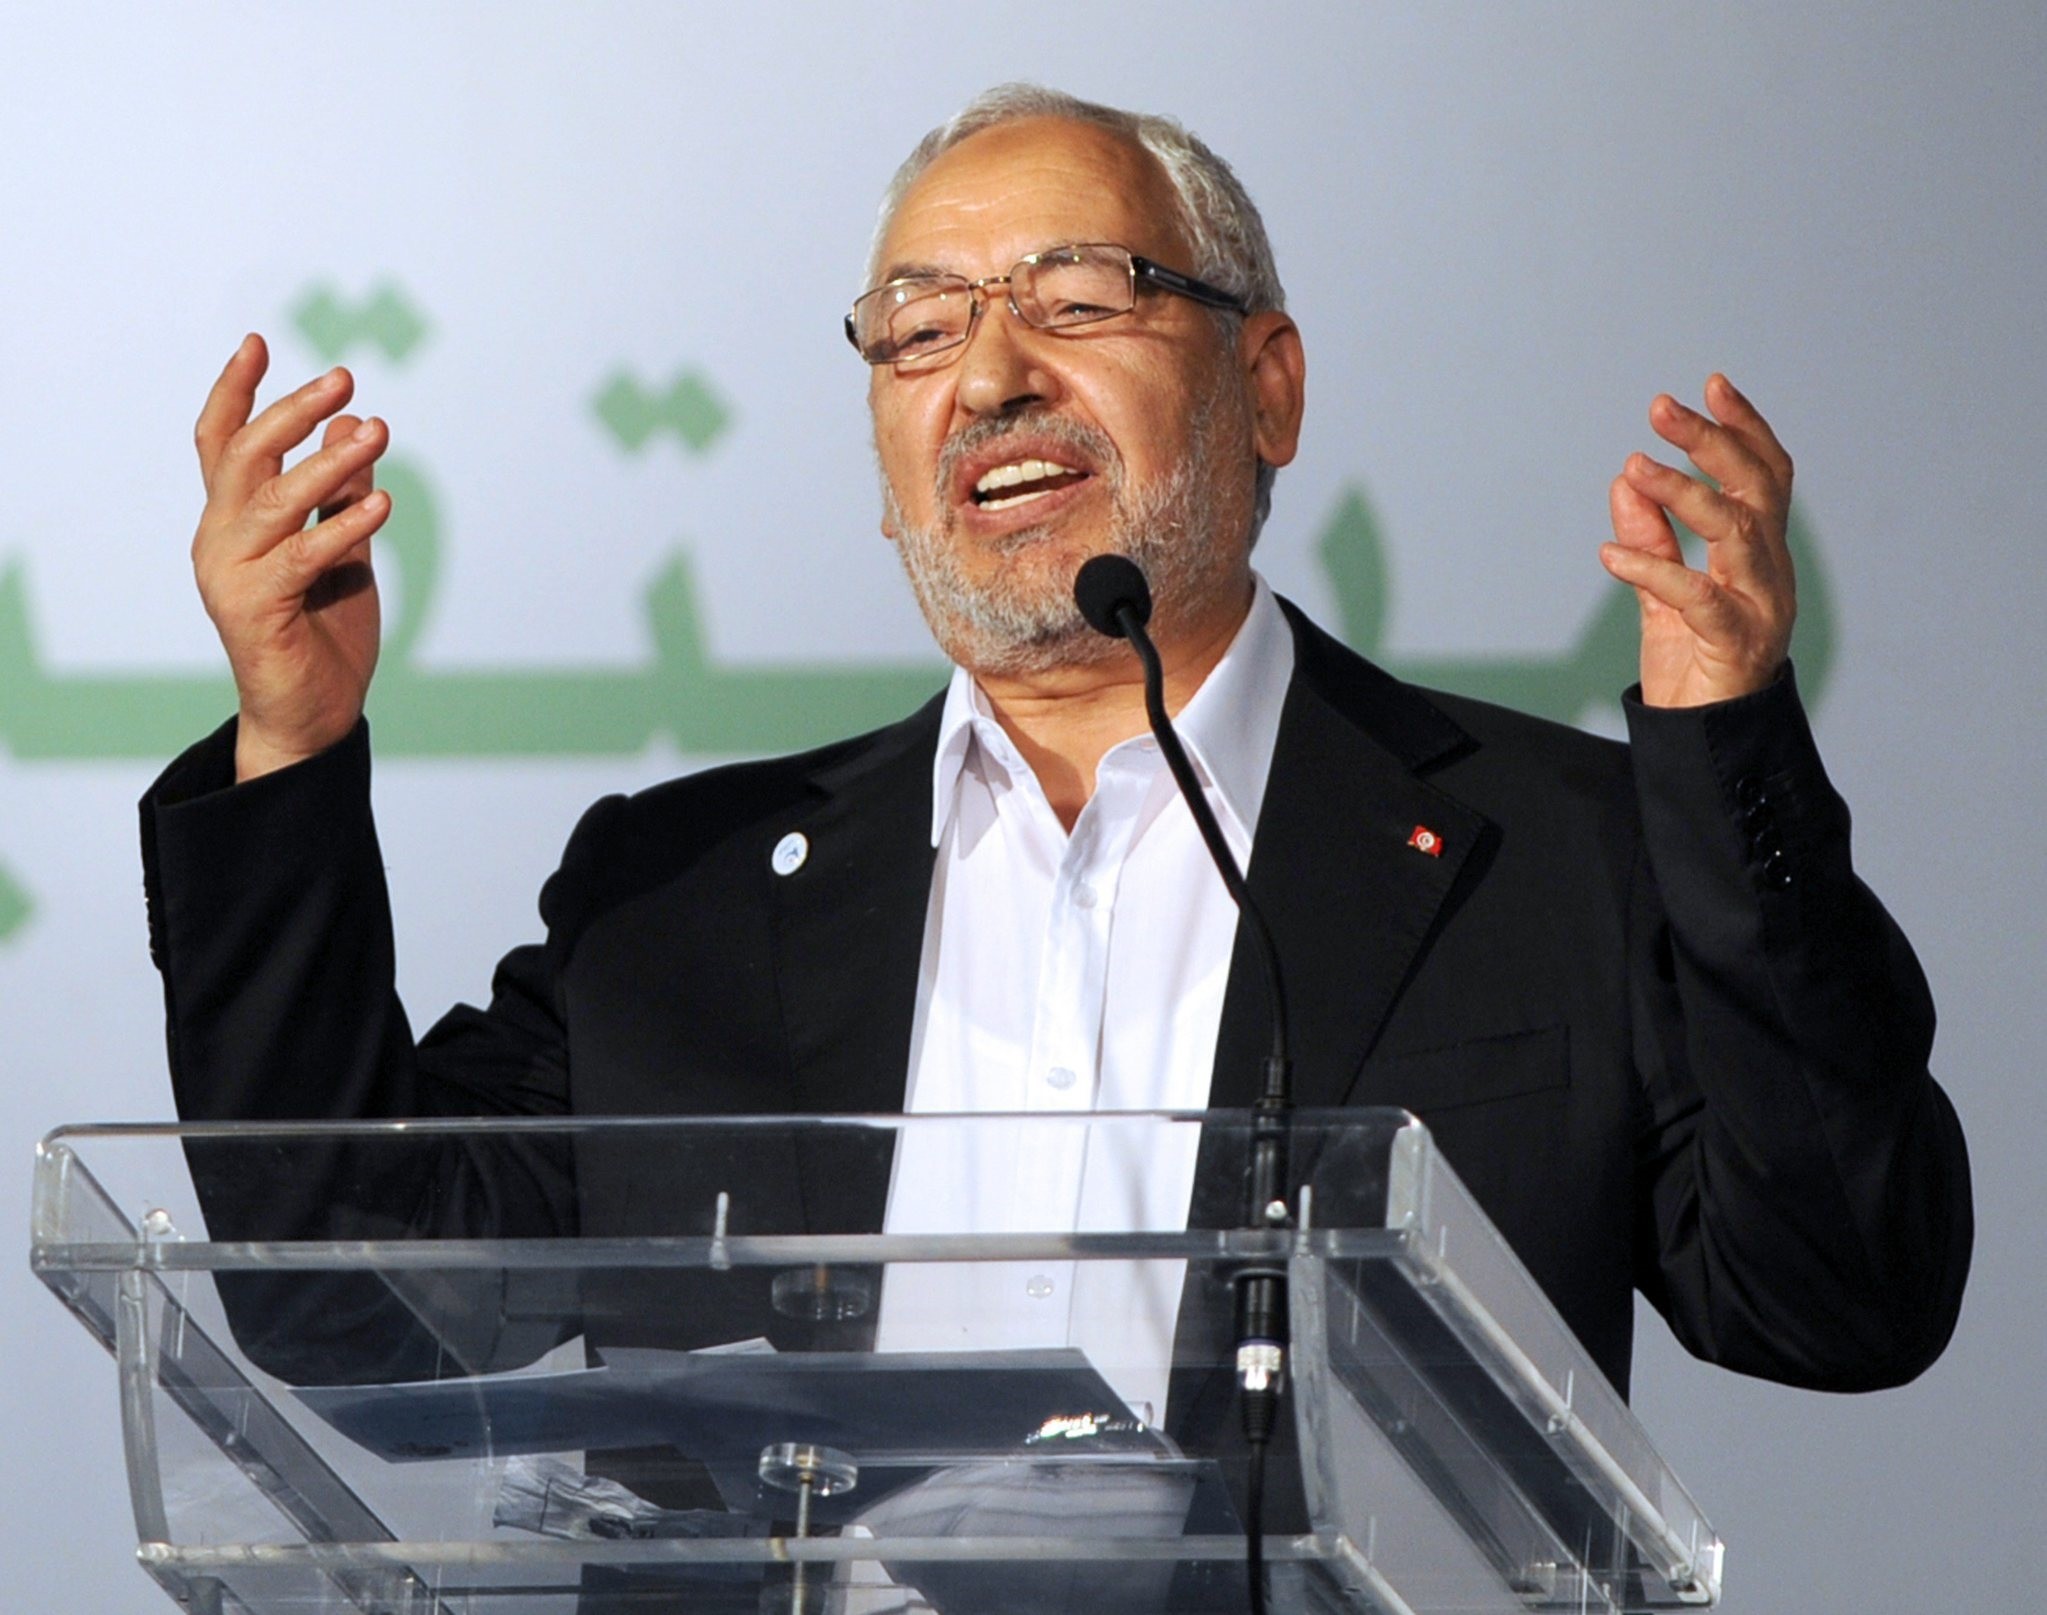 The head of Tunisia's ruling Islamist party Ennahda, Rached Ghannouchi gestures at the launch of its first congress at home in 24 years, on July 12, 2012 in Tunis. (AFP Photo)